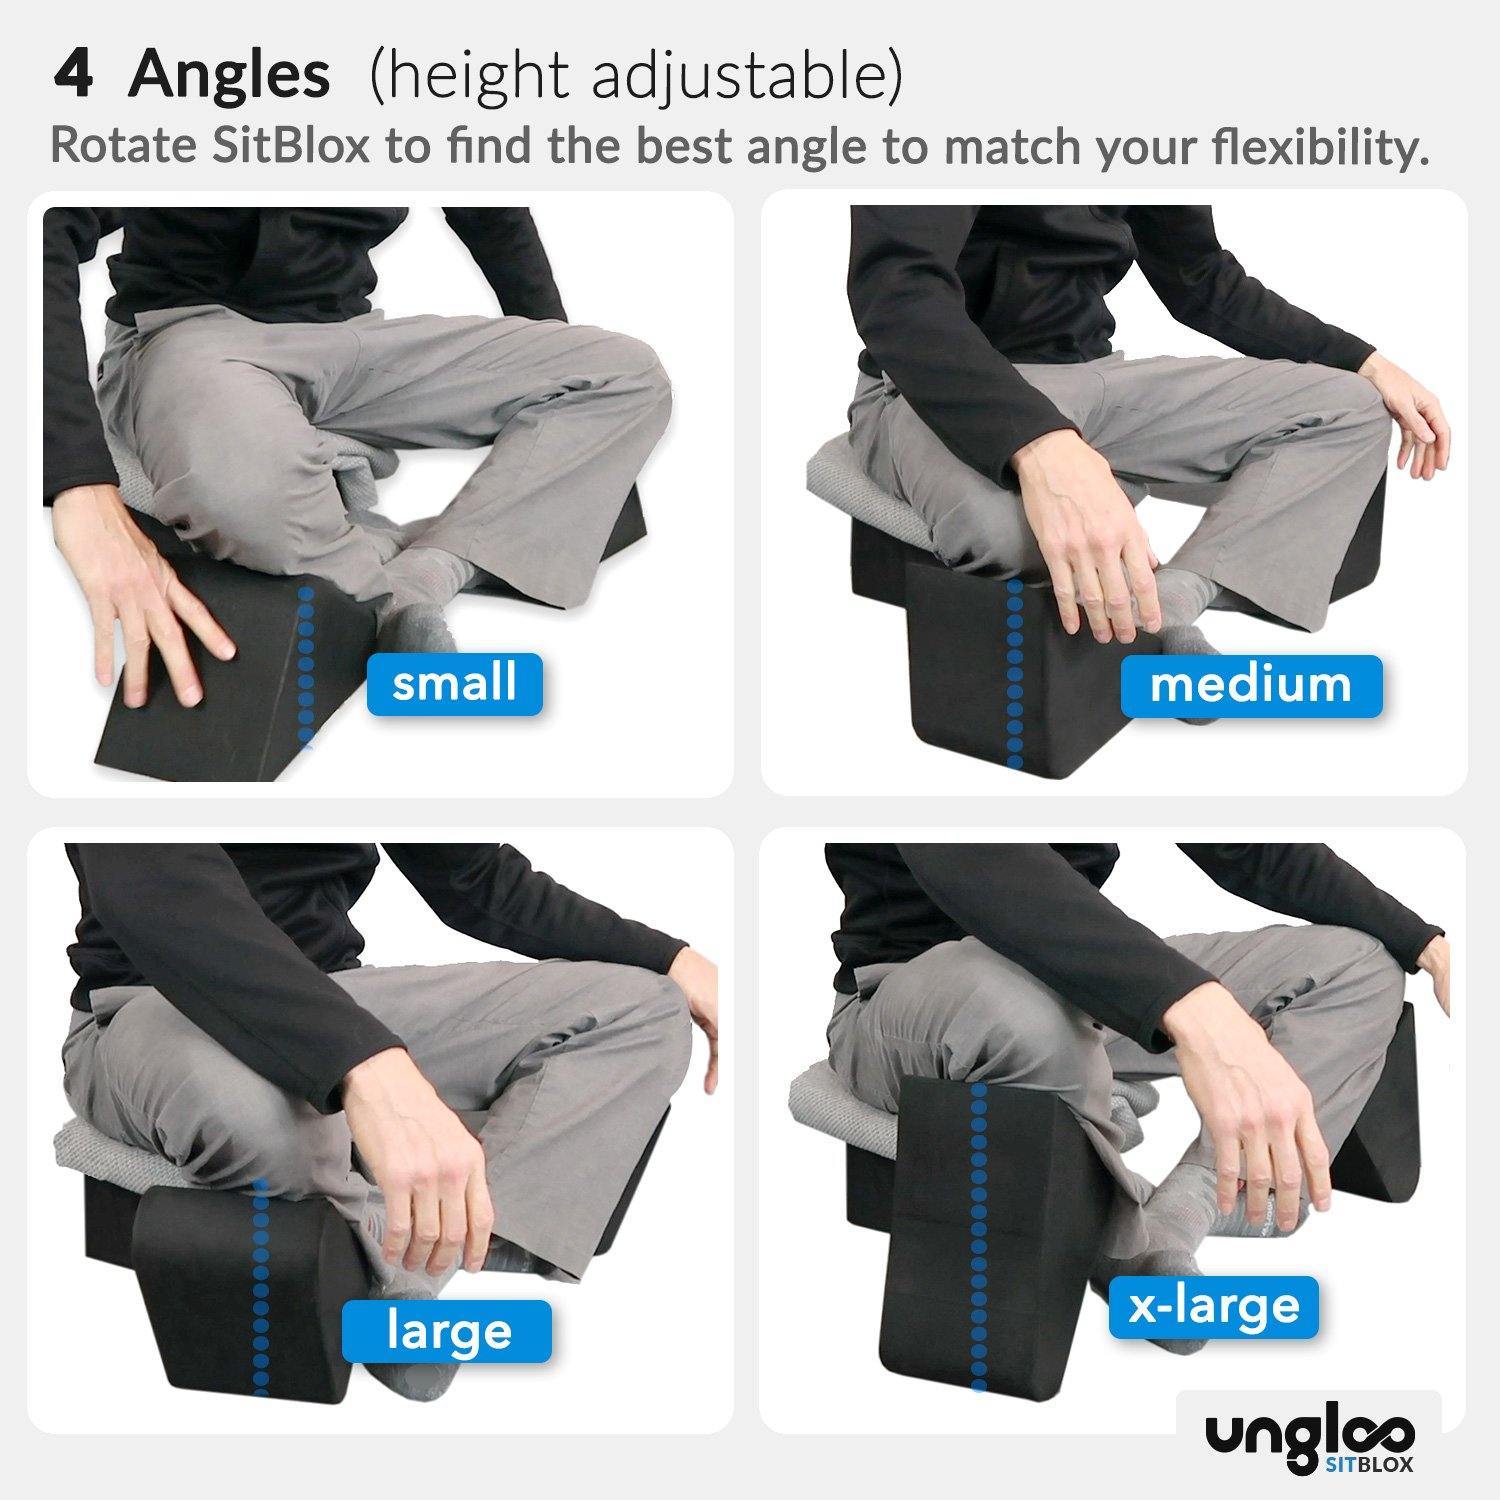 Graphic showing how the SitBlox are adjustable from Small to X-Large by changing their position.